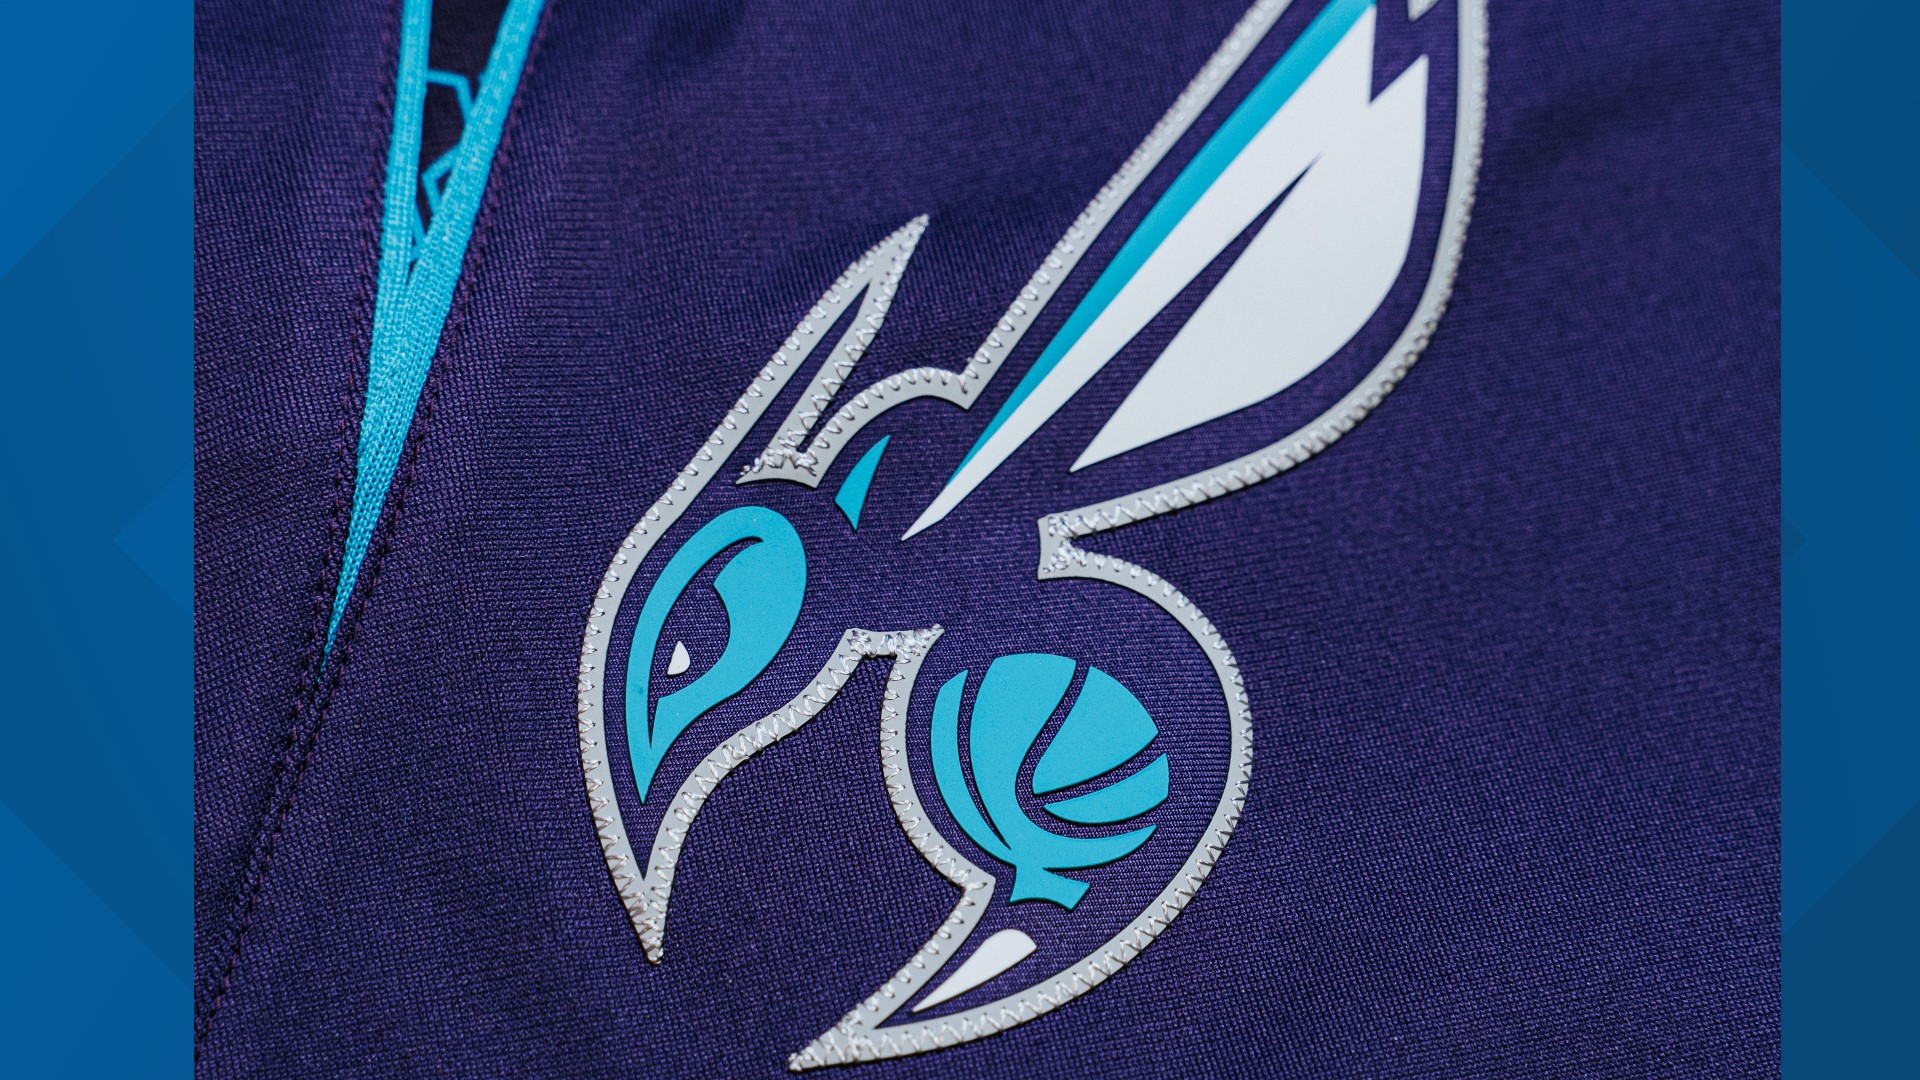 The Charlotte Hornets are showing off their new "Statement" jersey for the upcoming season.